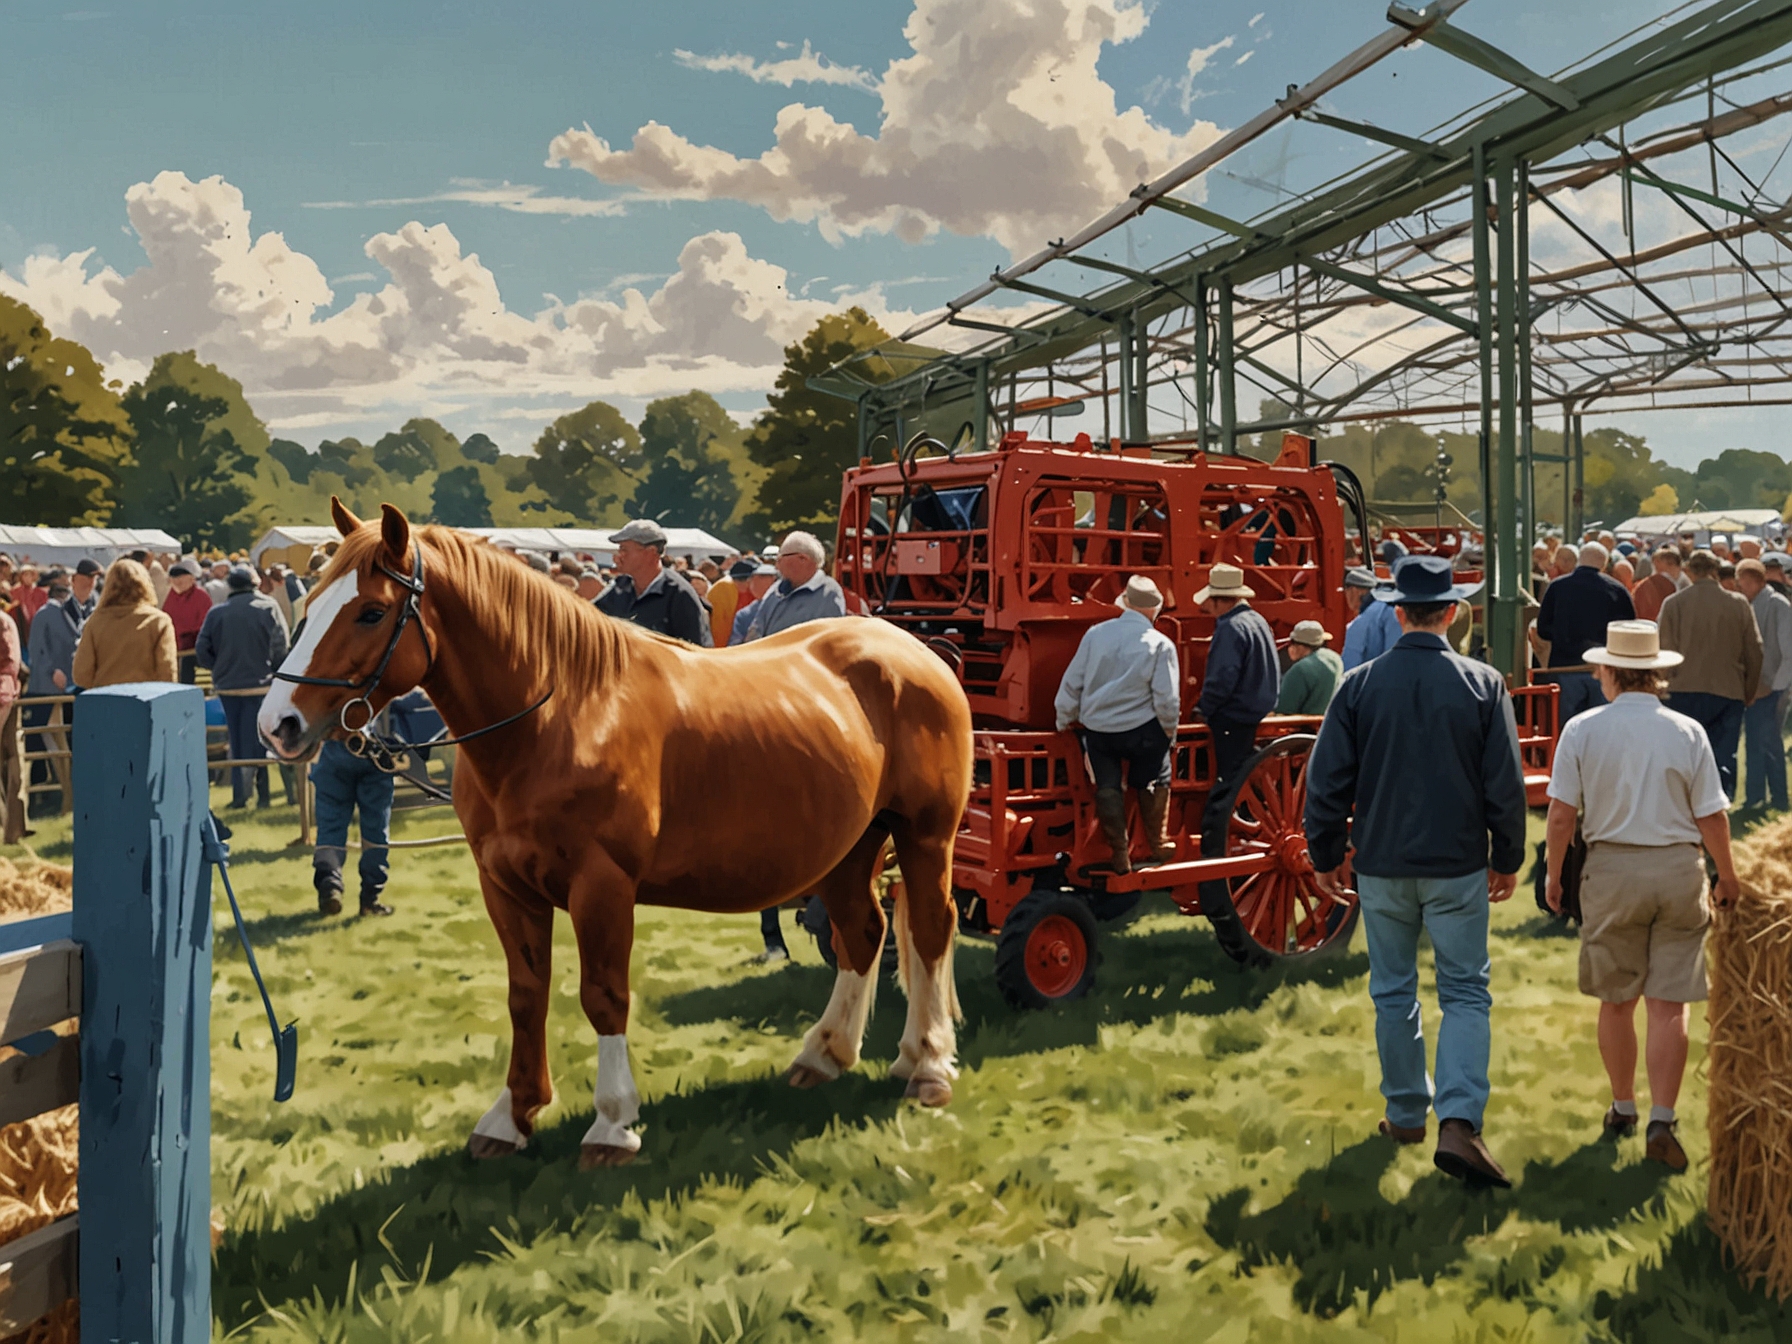 A bustling scene at the Cheshire Show with visitors observing an array of agricultural machinery, livestock pens, and pony club races, reflecting the vibrant agricultural heritage of rural Britain.